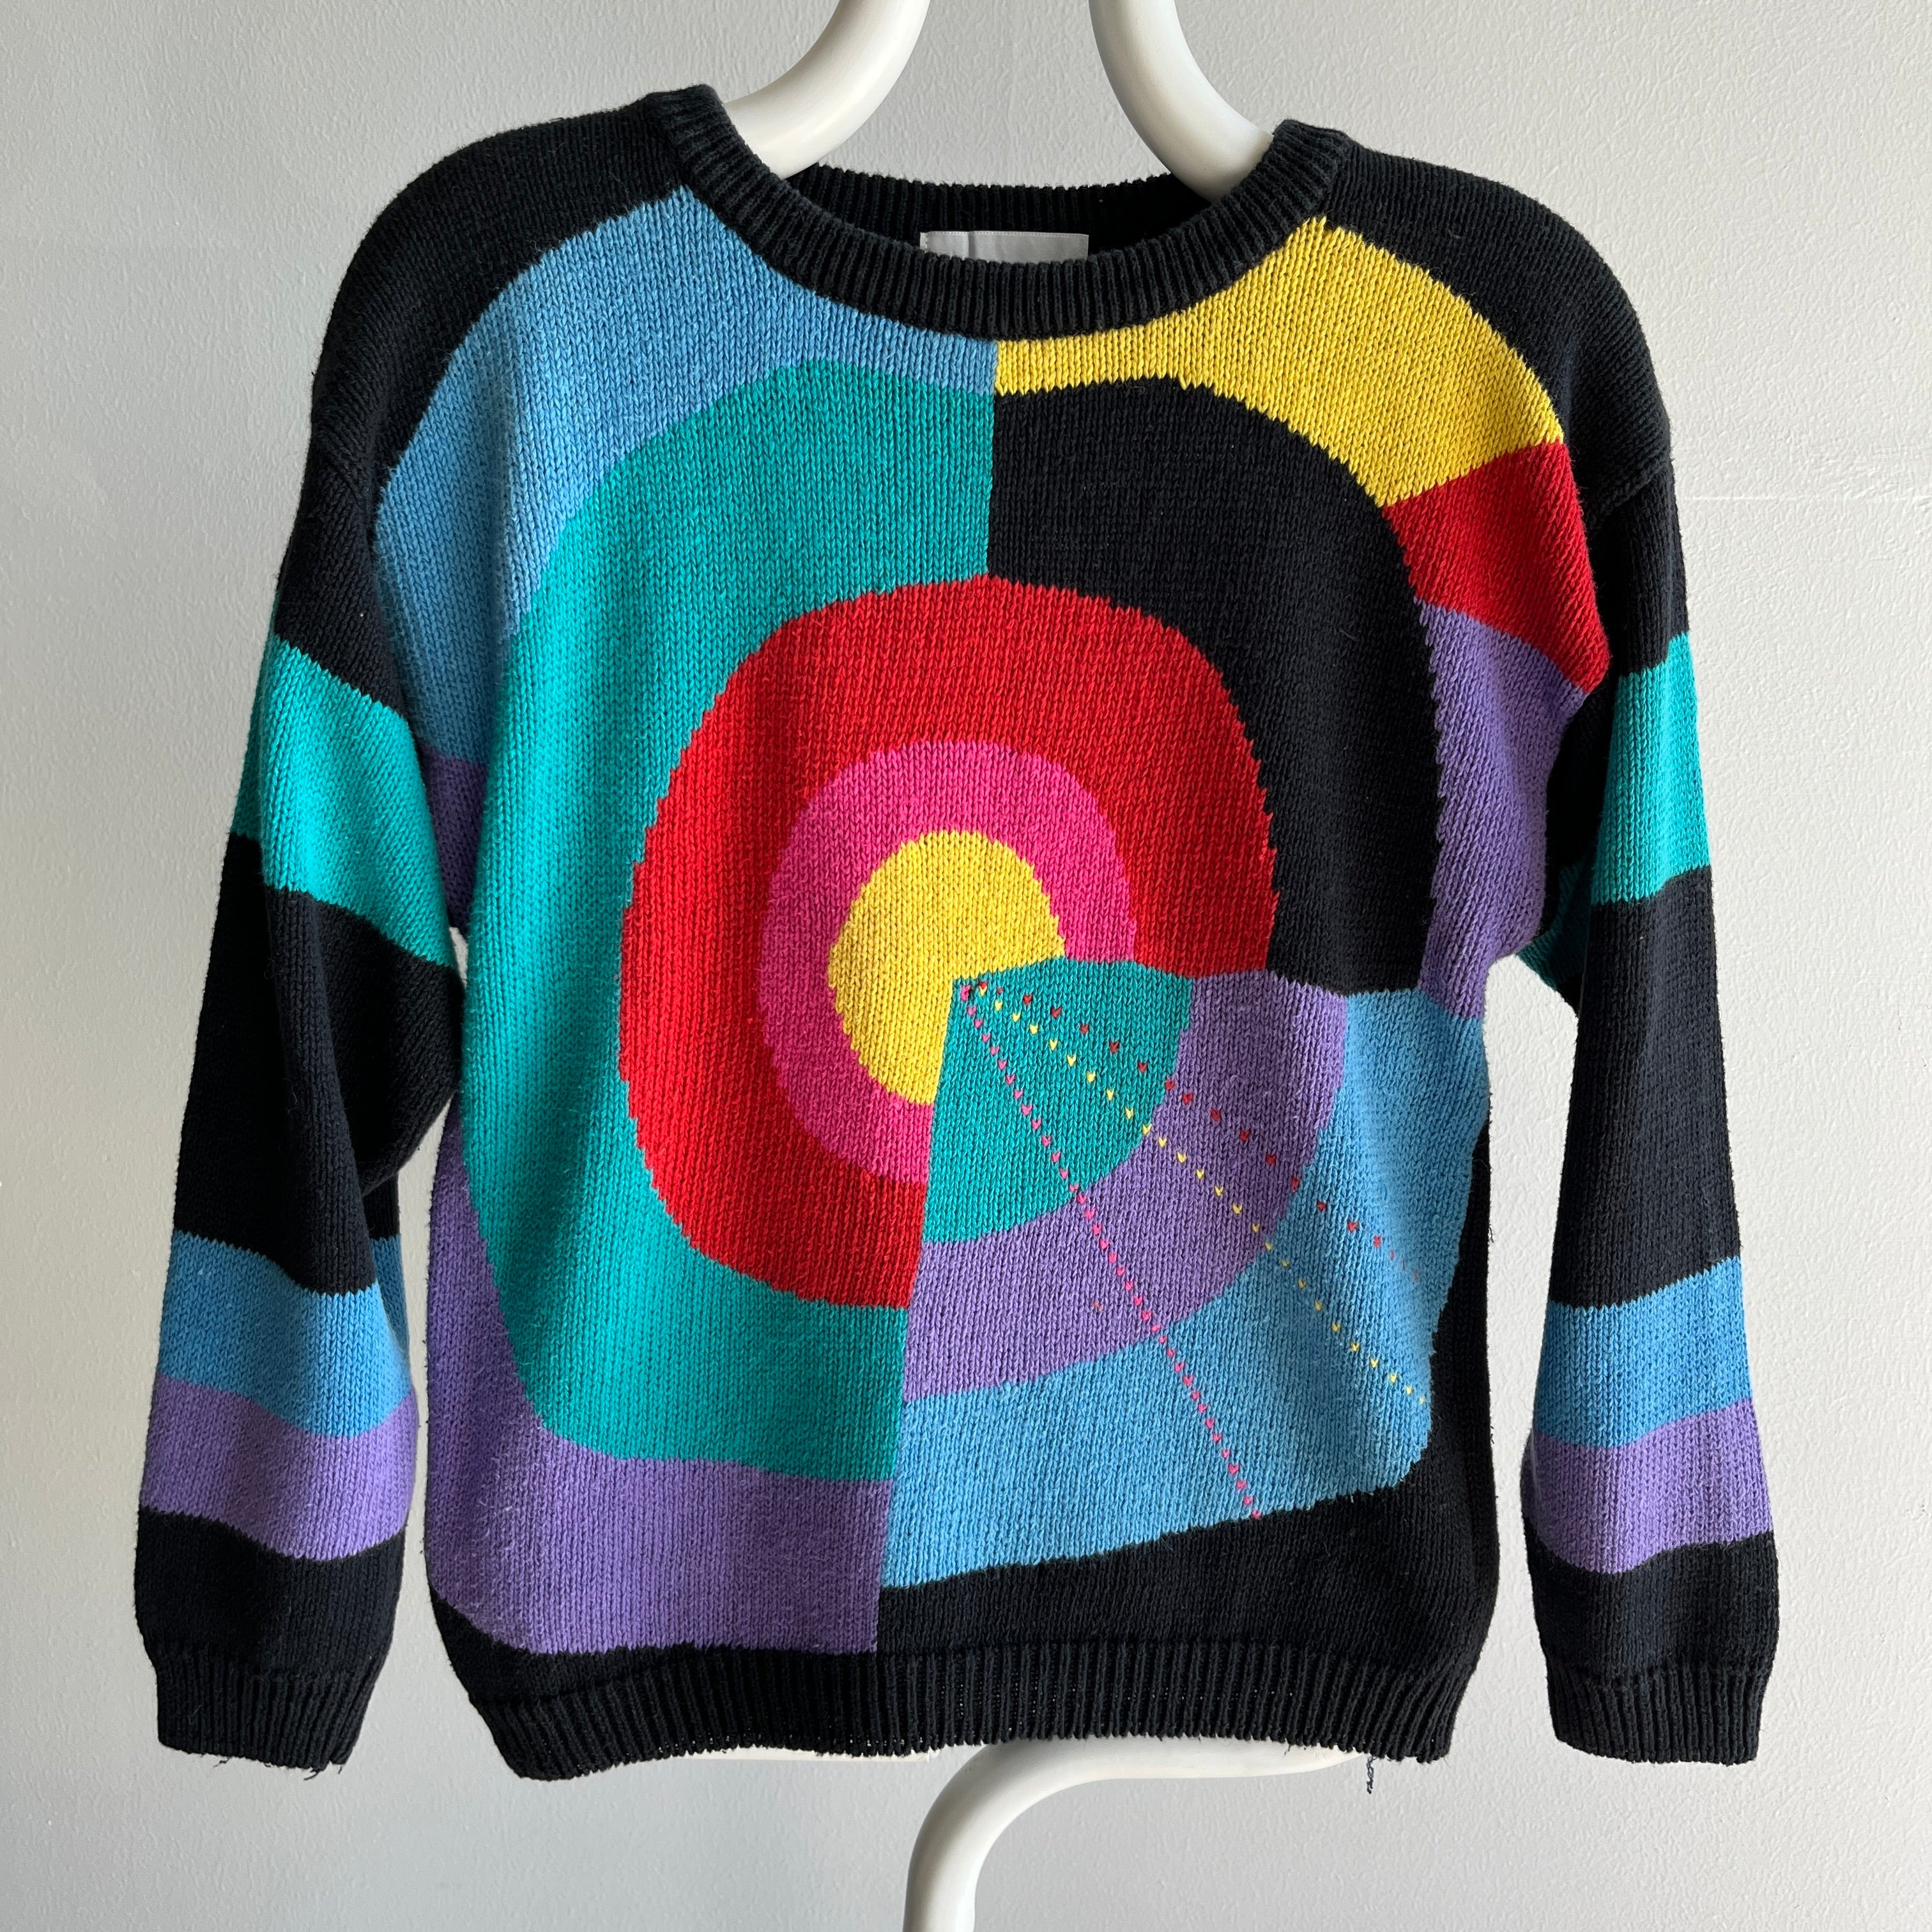 1980s Colorful Geometric Sweater - Cotton Blend